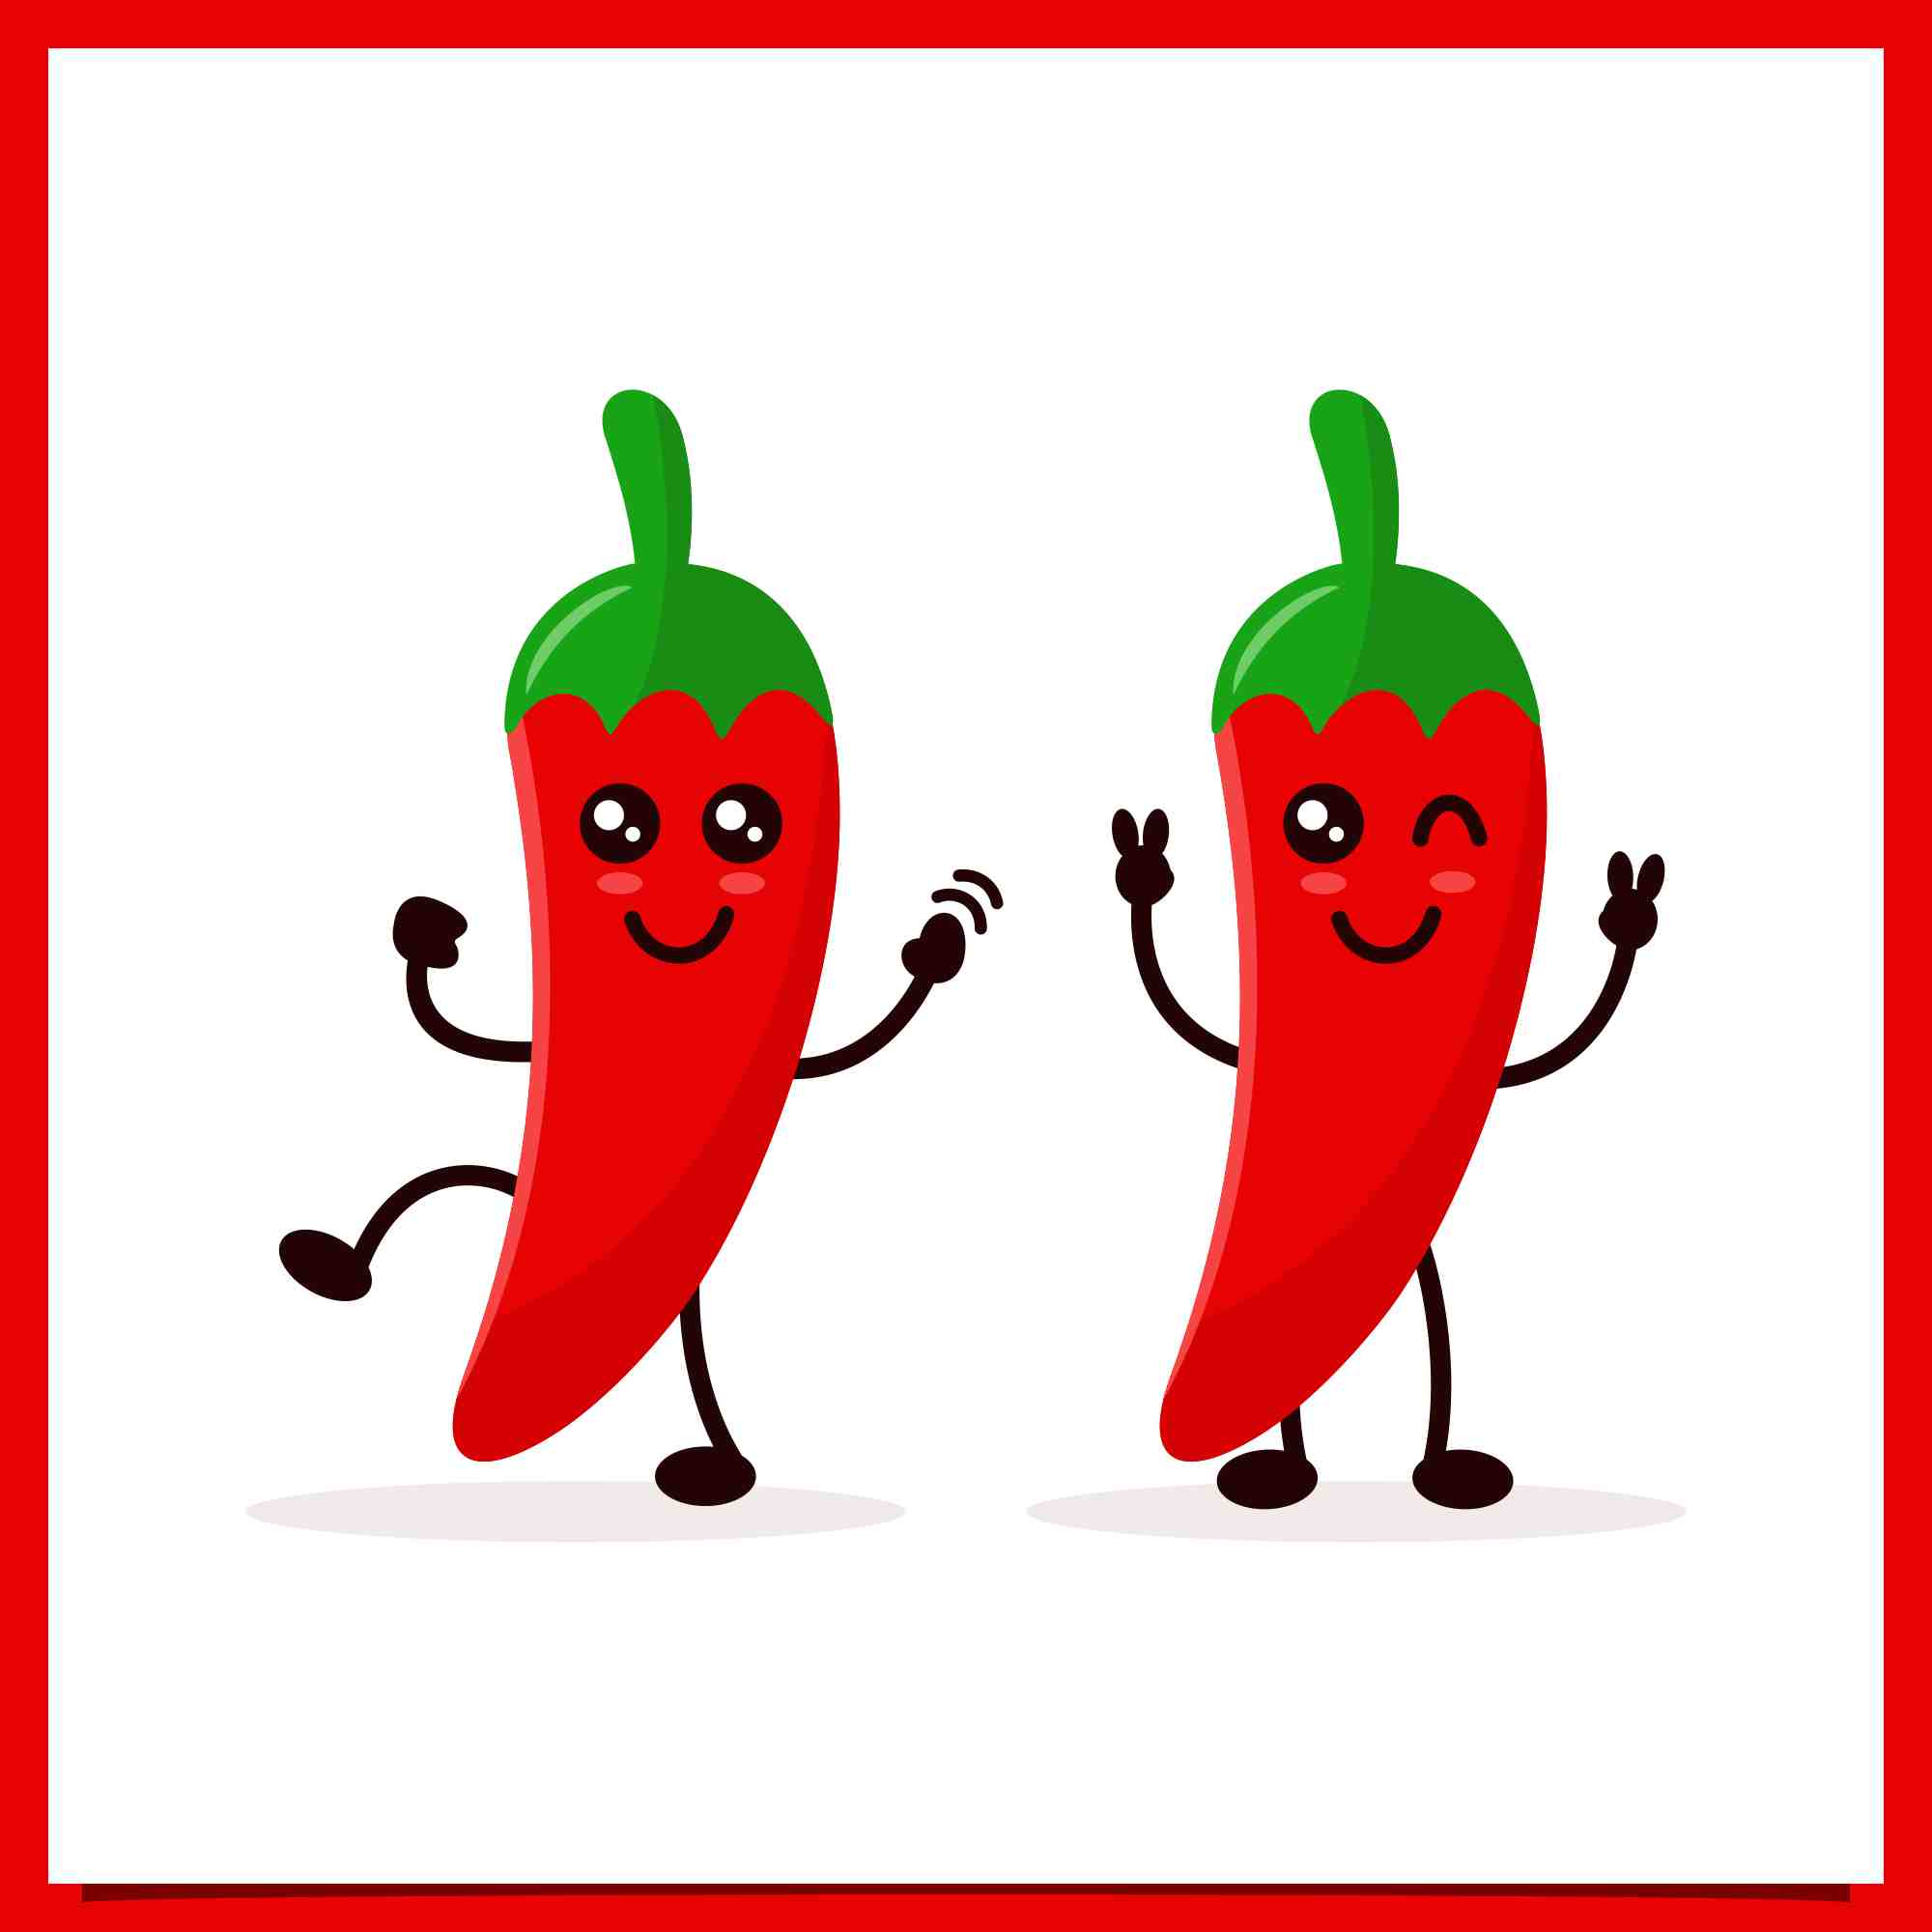 Set cute chili charater vector illustration - $4 preview image.